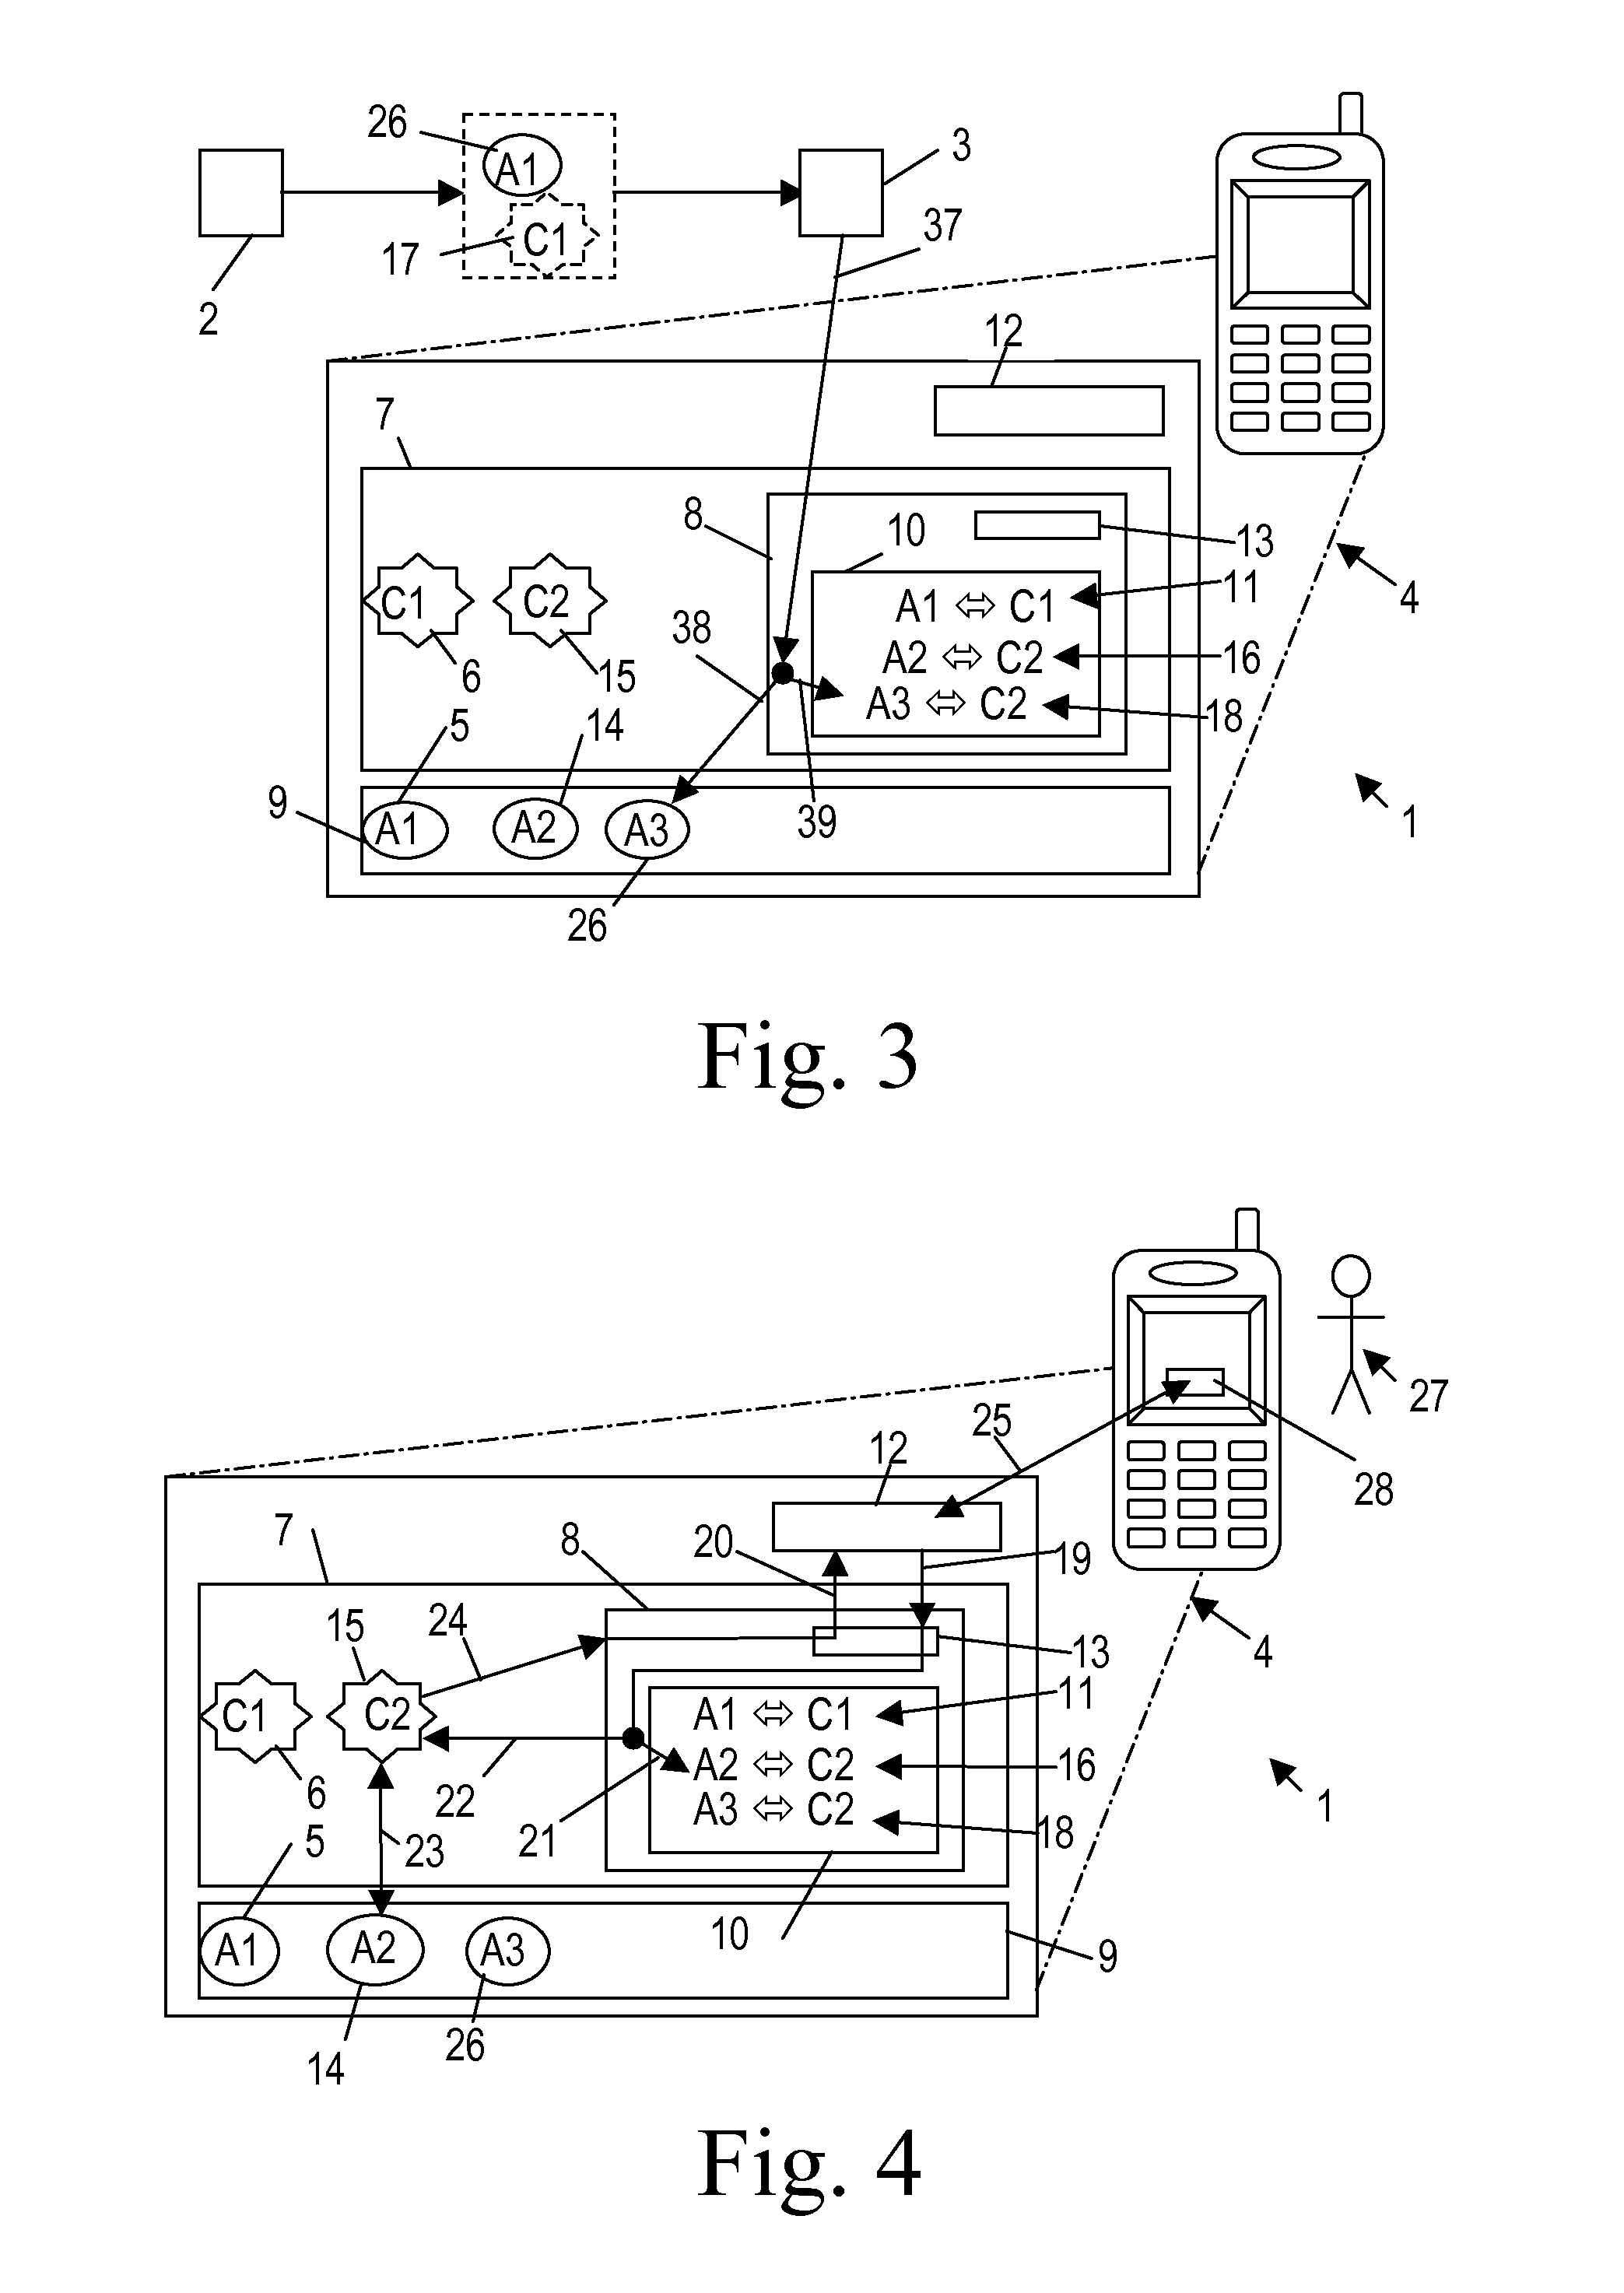 Method of accessing applications in a secure mobile environment